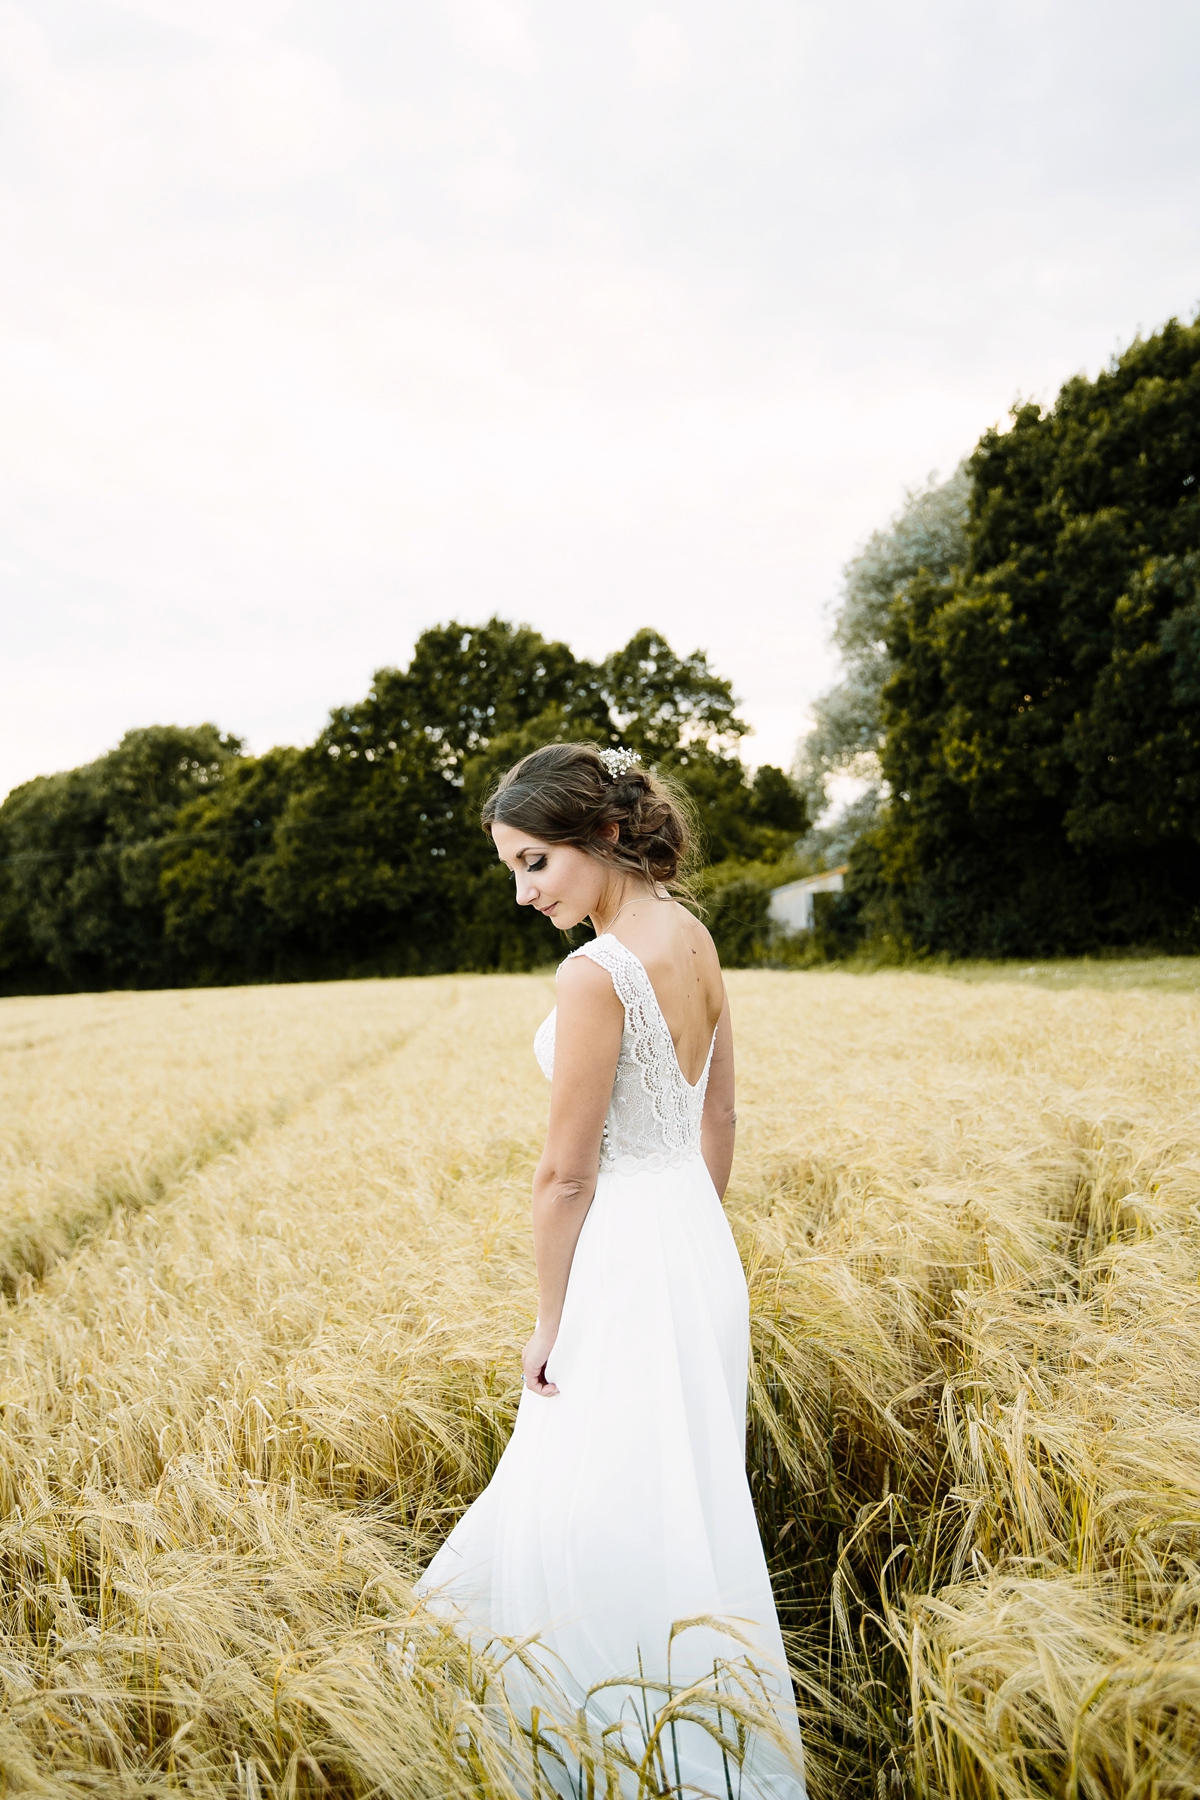 8 A Flora wedding dress for a family wedding in the countryside